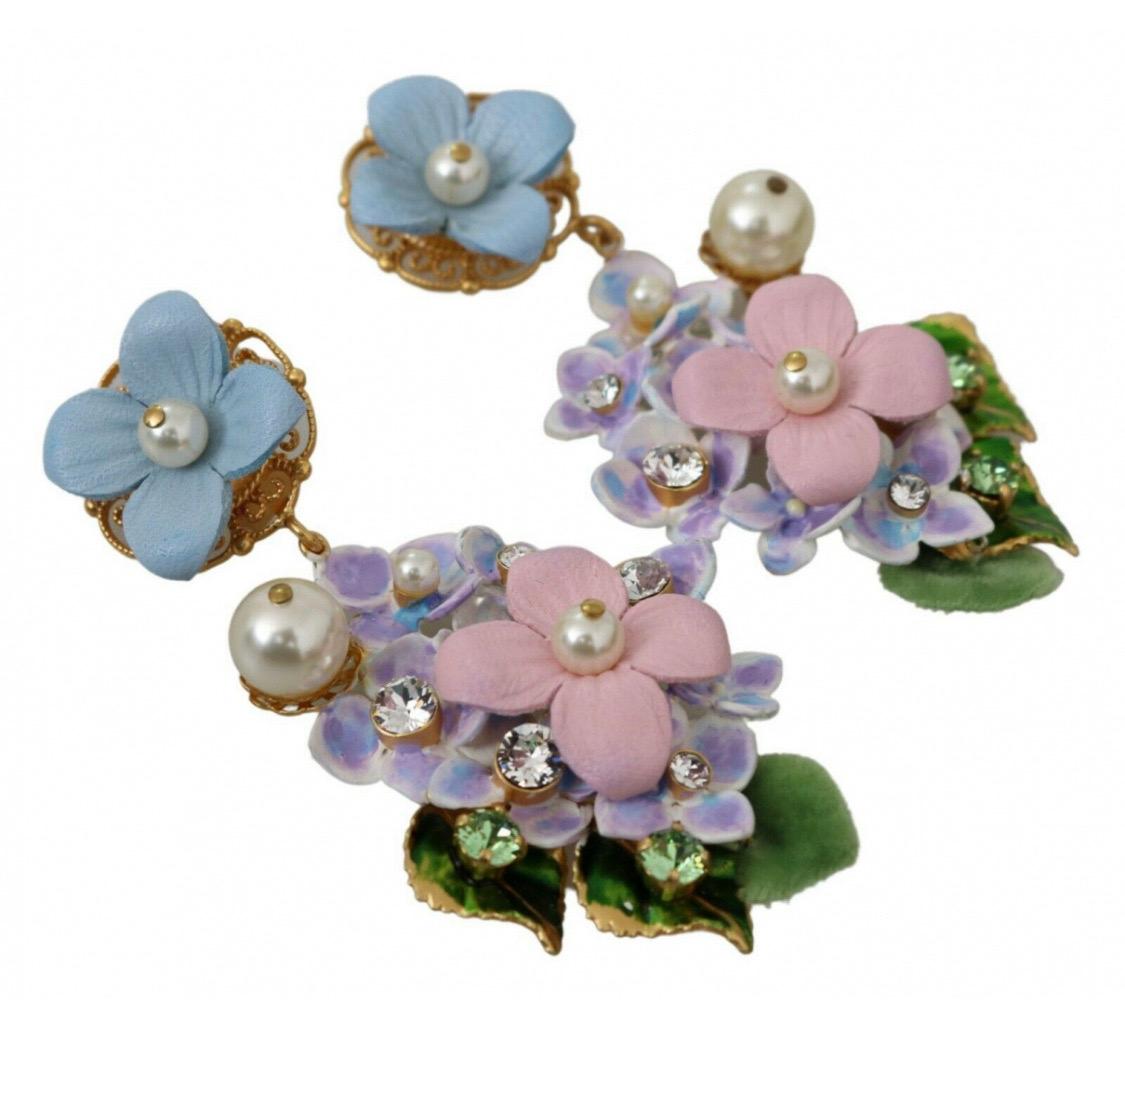 Gorgeous brand new with tags,
100% Authentic Dolce &
Gabbana earrings.

Model: Clip-on, dangling

Motive: HORTENSIA BOUQUET,
flowers, pearls

Material: 40% Brass, 30% leather,
20% crystals, 10% PA

Color: Gold, purple, pink
Crystals: Clear

Logo